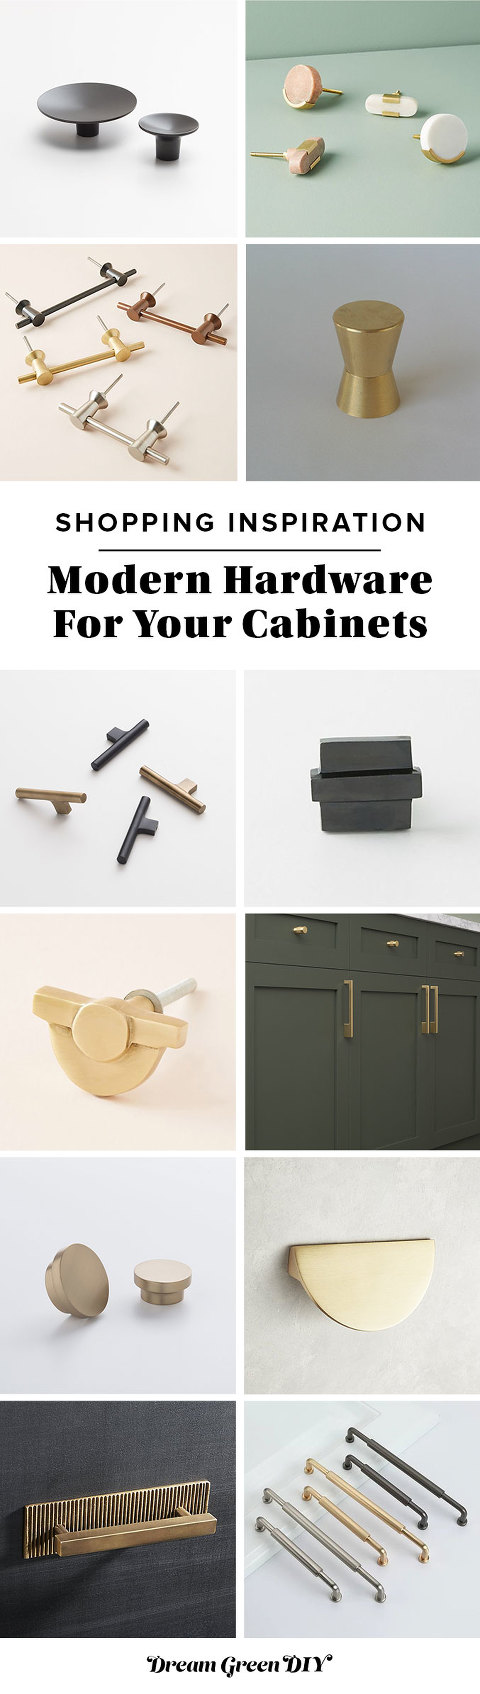 Modern Hardware For Your Cabinets